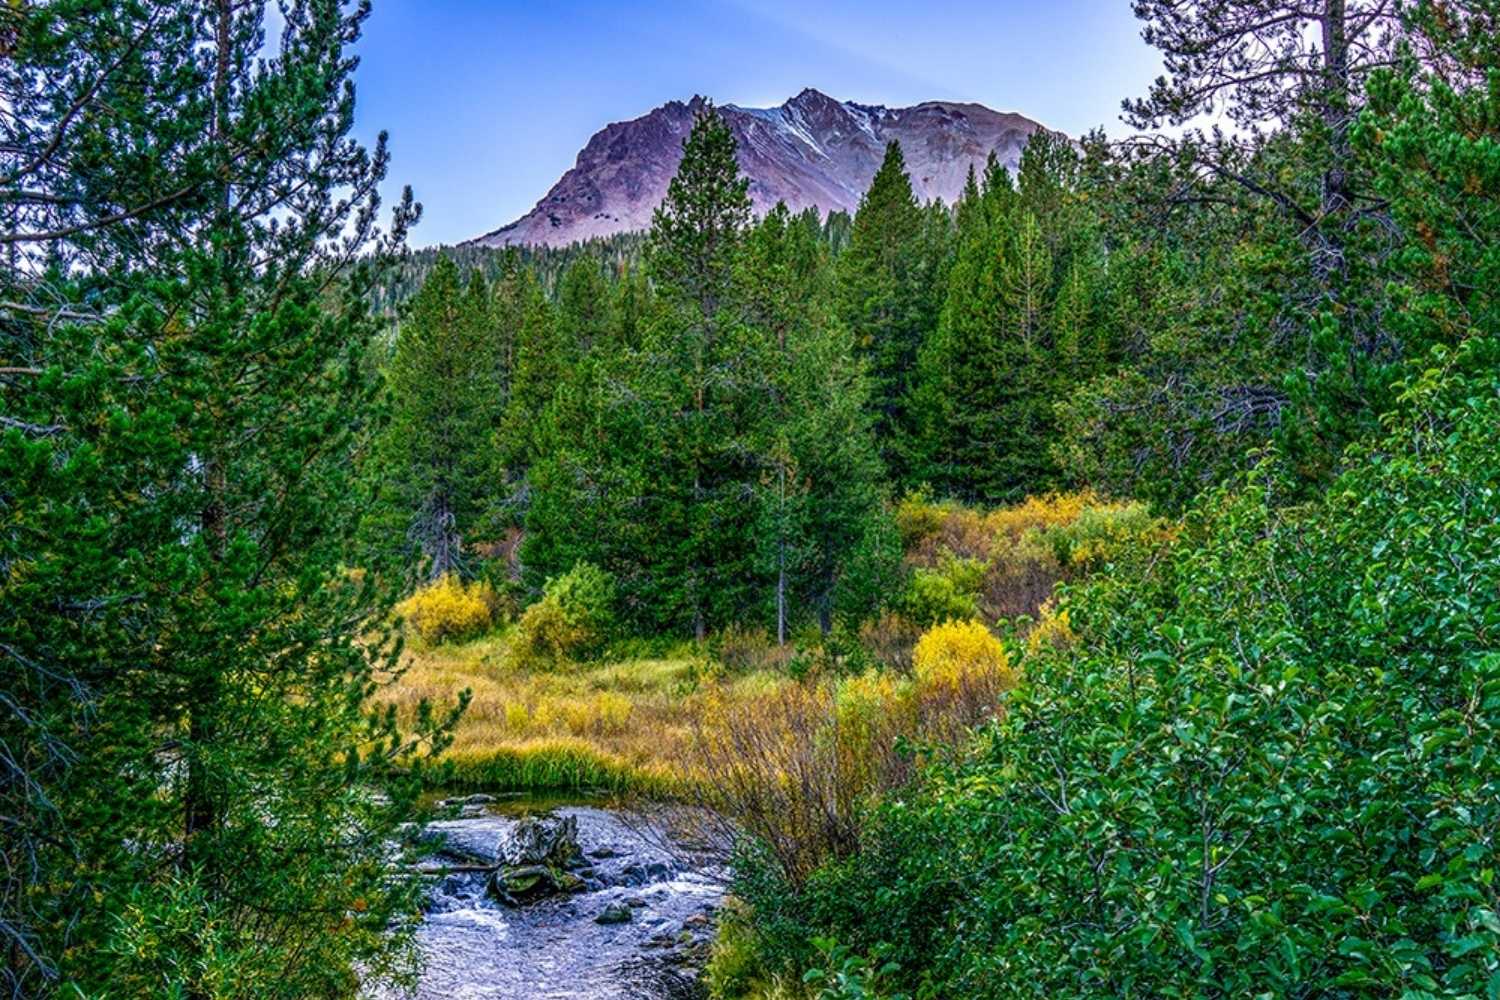 Fall colors starting at Hat Creek with Lassen Peak in the background